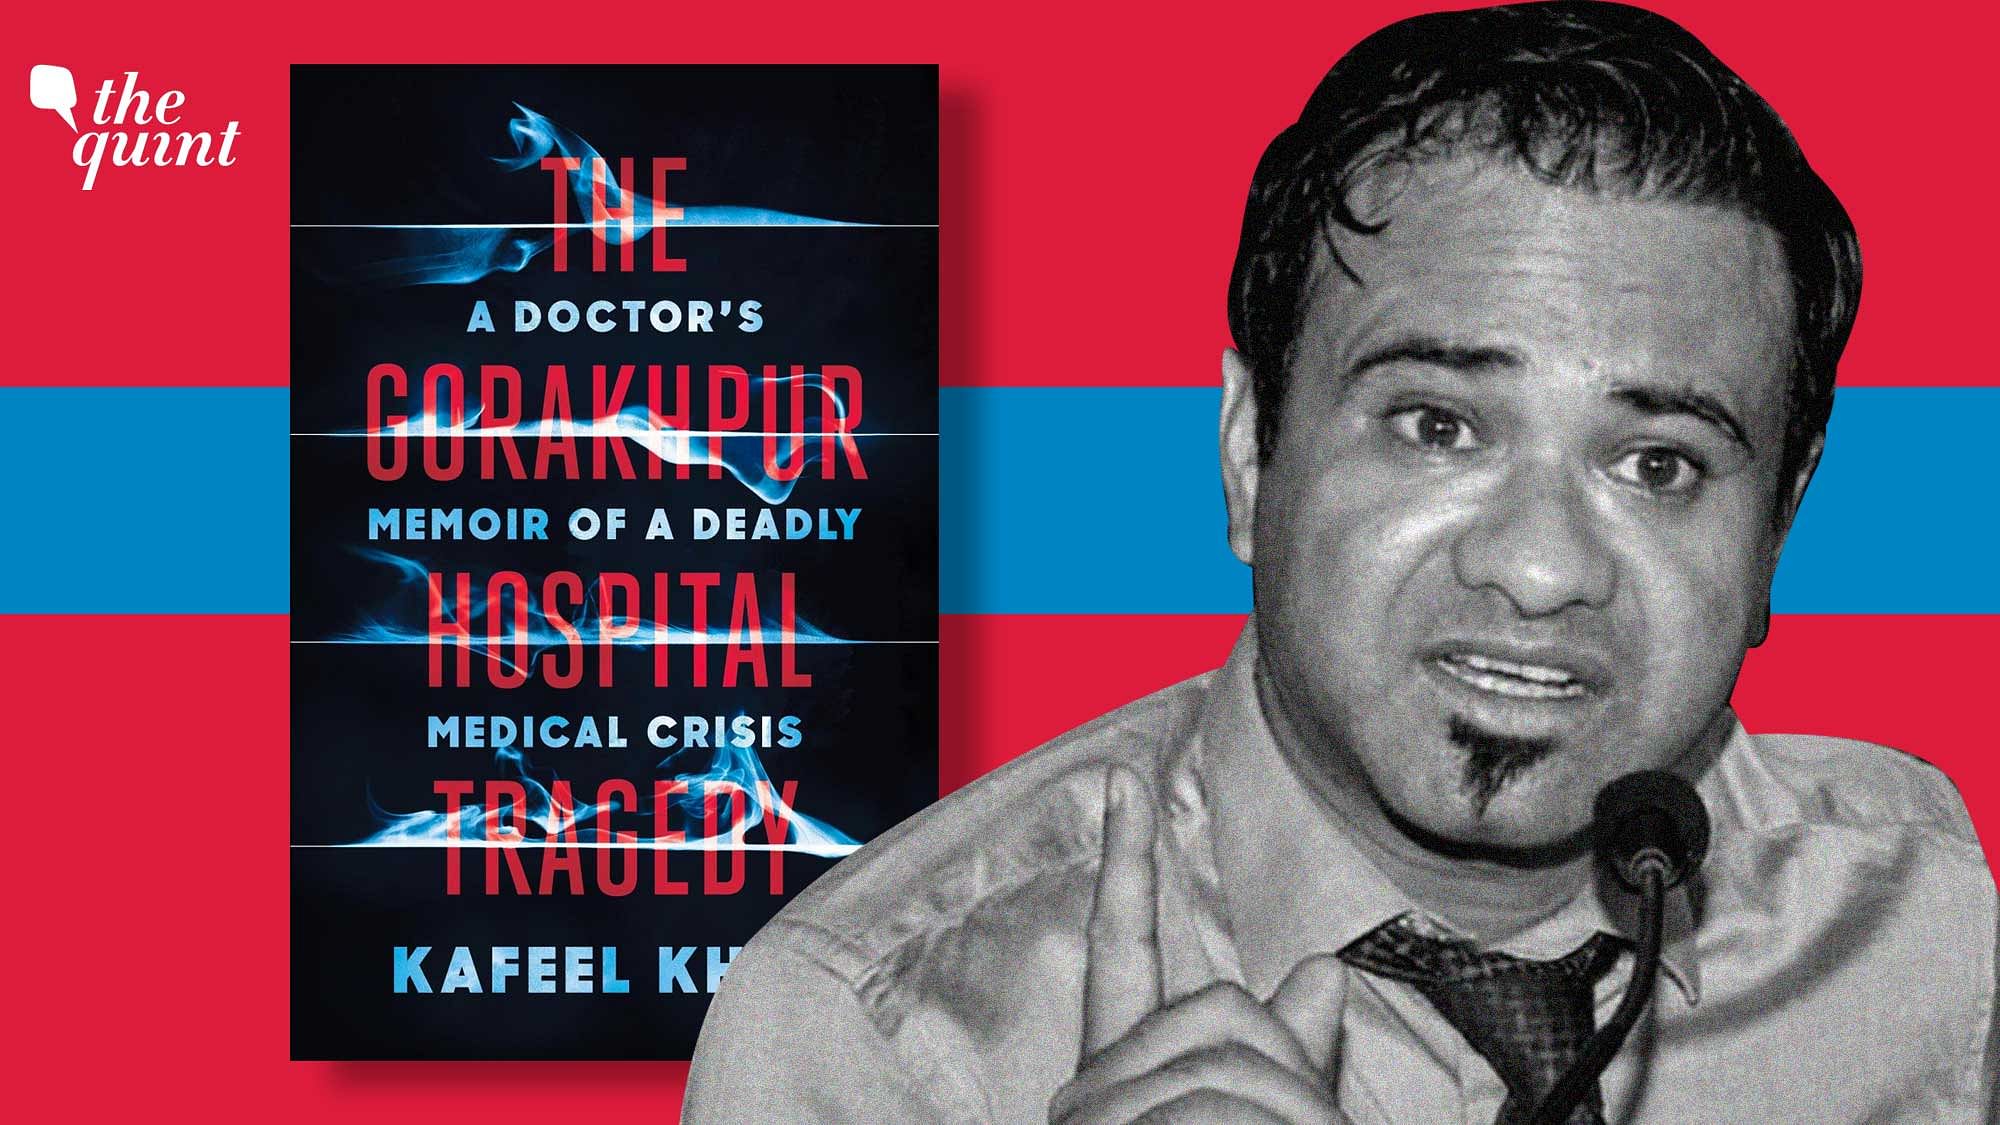 <div class="paragraphs"><p>"I am writing about my experience here, in a single condensed account, but my time in prison constituted some of the most agonising, humiliating – and what I considered senseless – experiences of my life," shares Dr Kafeel Khan in his upcoming book.</p></div>